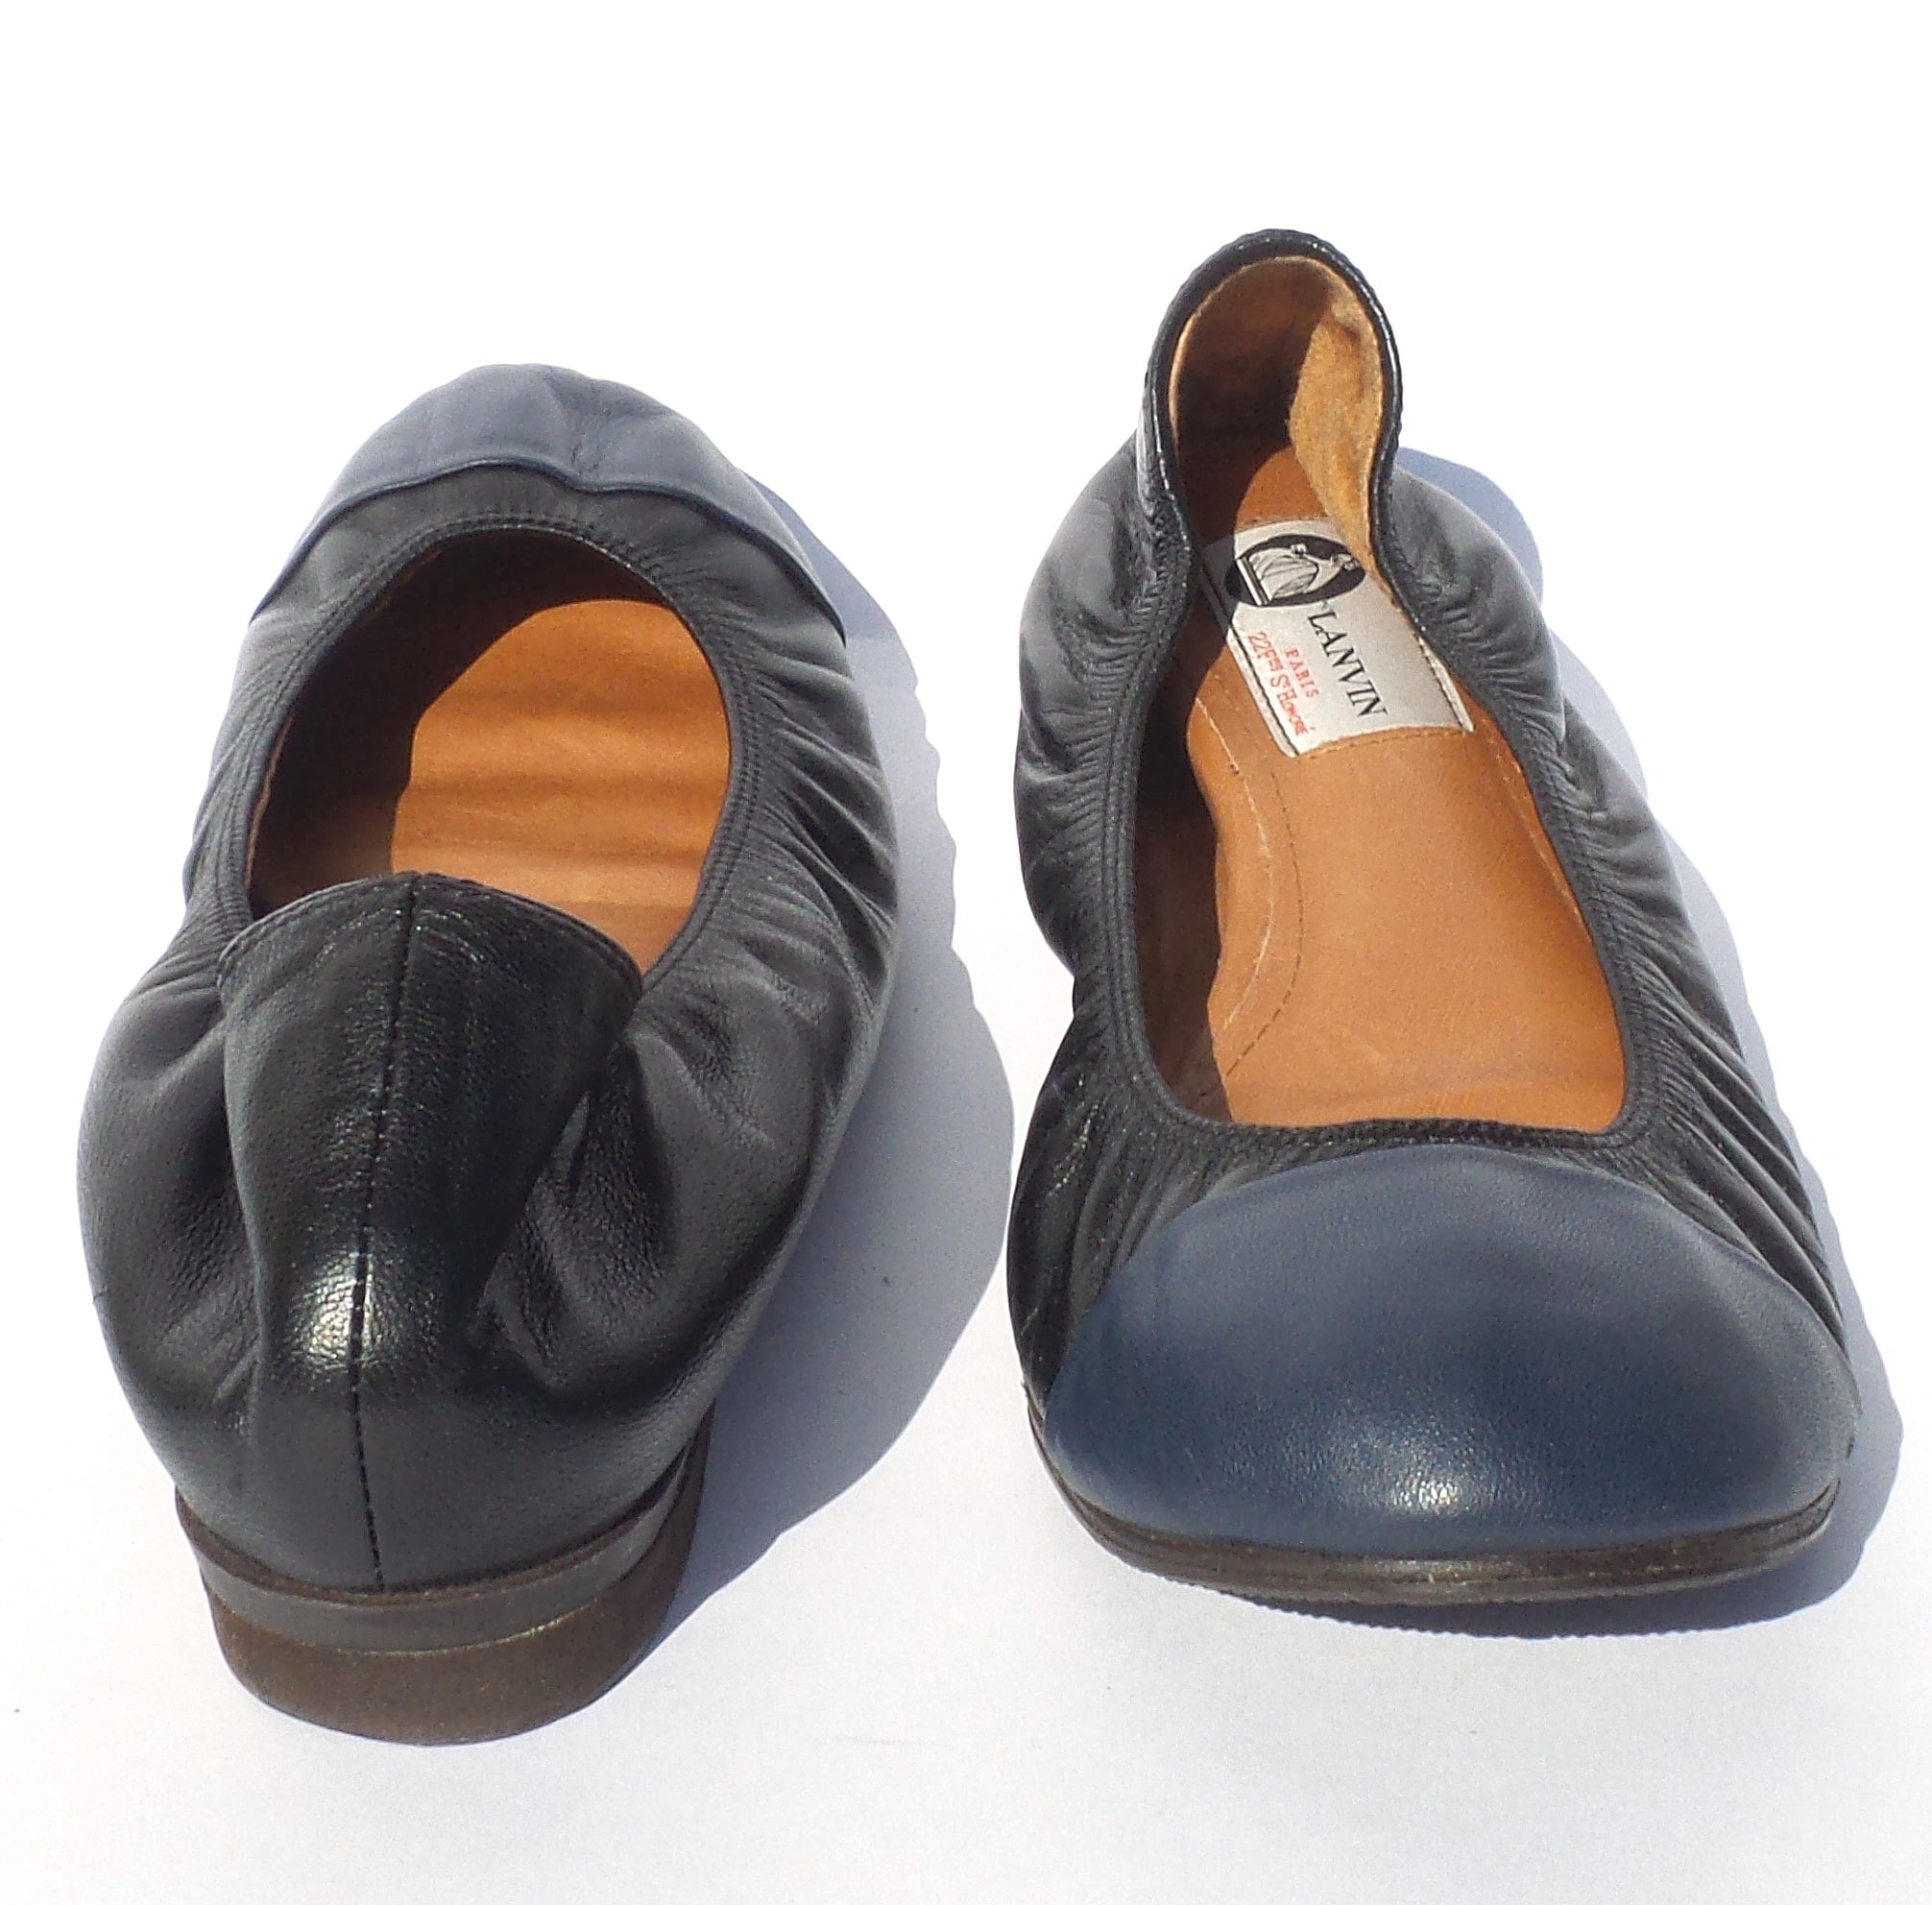 leather navy flats